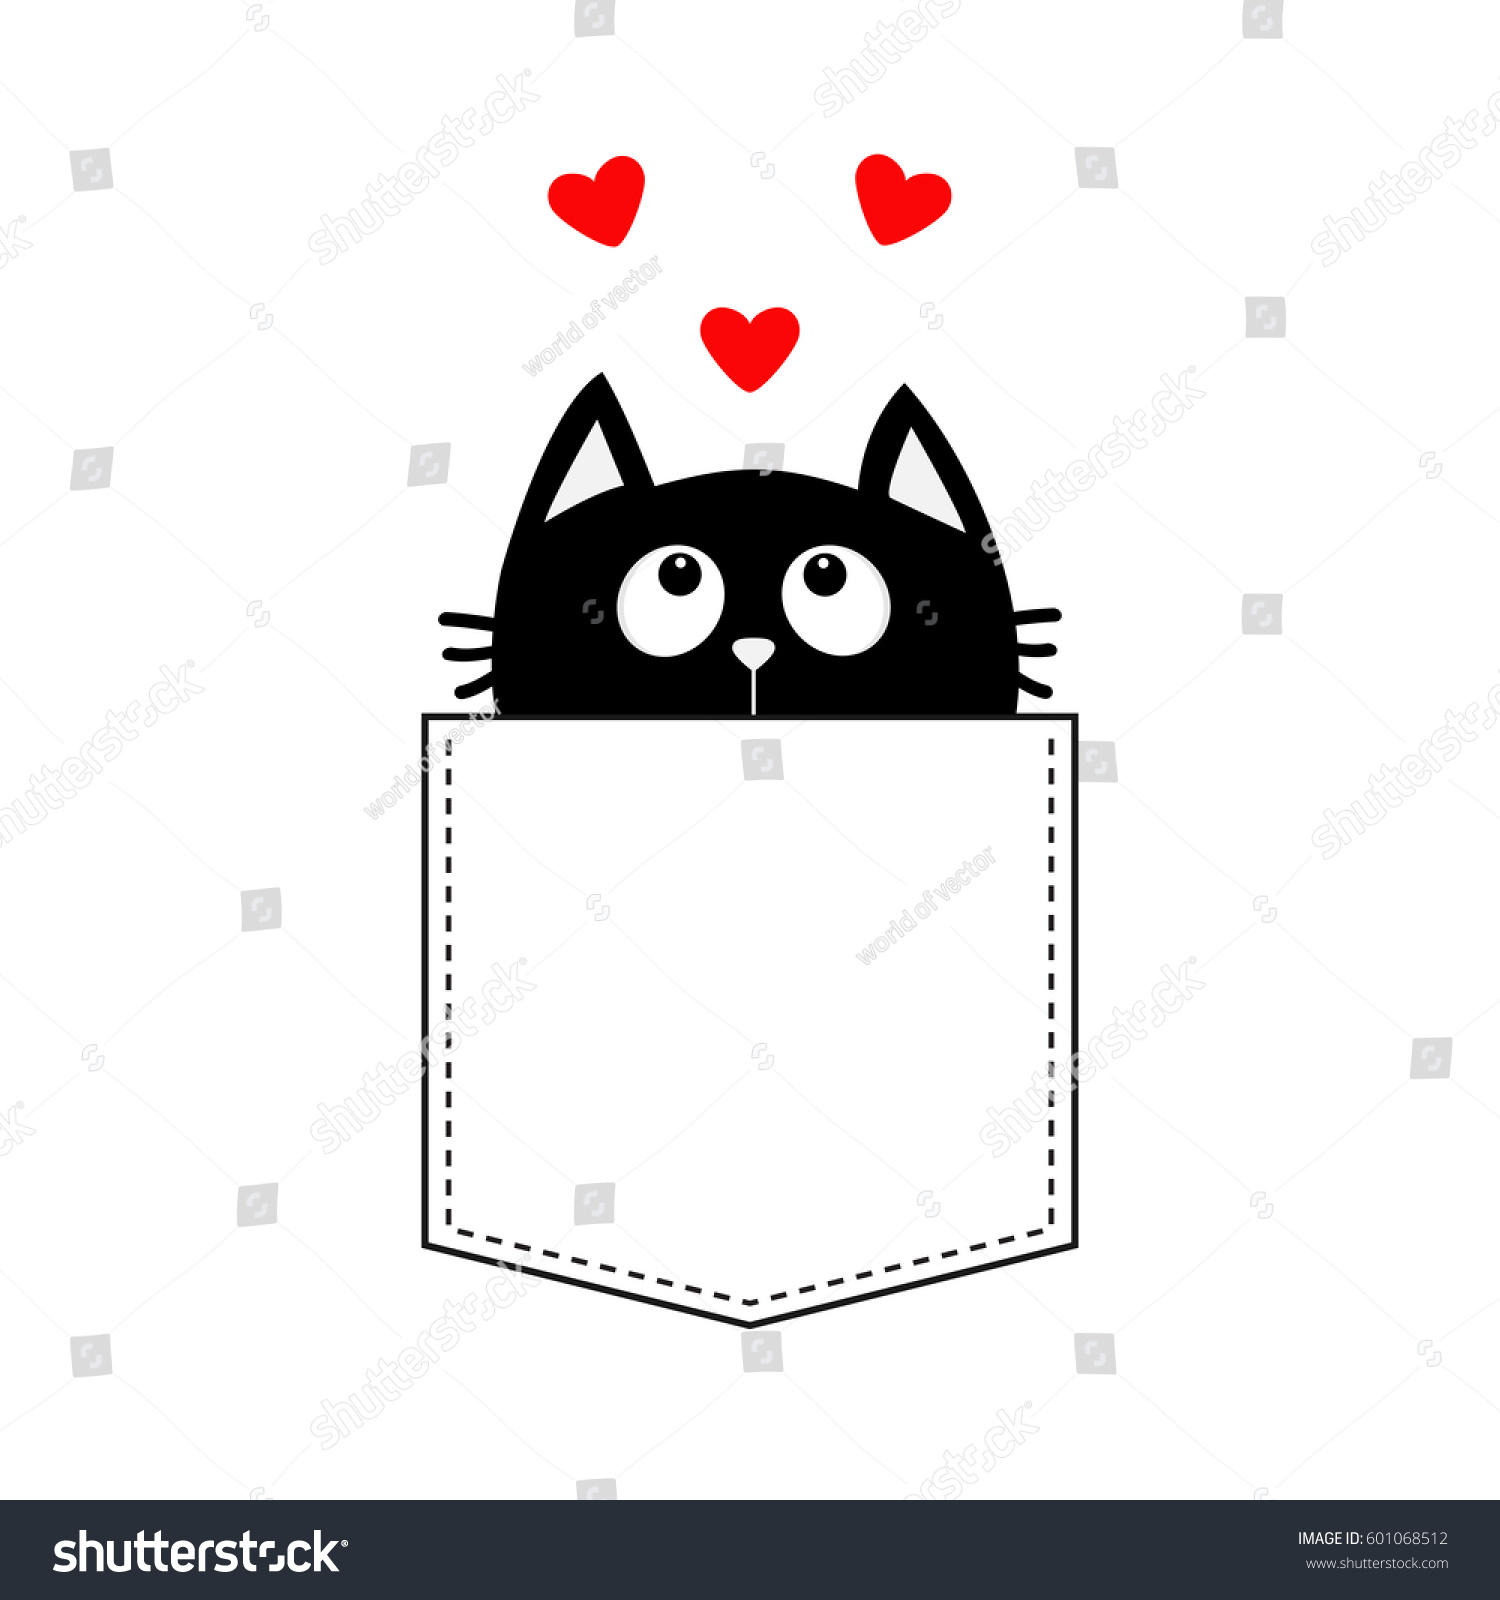 SVG of Black cat in the pocket looking up to three red heart set. T-shirt design. Cute cartoon character. Kawaii animal. Love Greeting card. Flat design style. White background. Isolated. Vector illustration svg